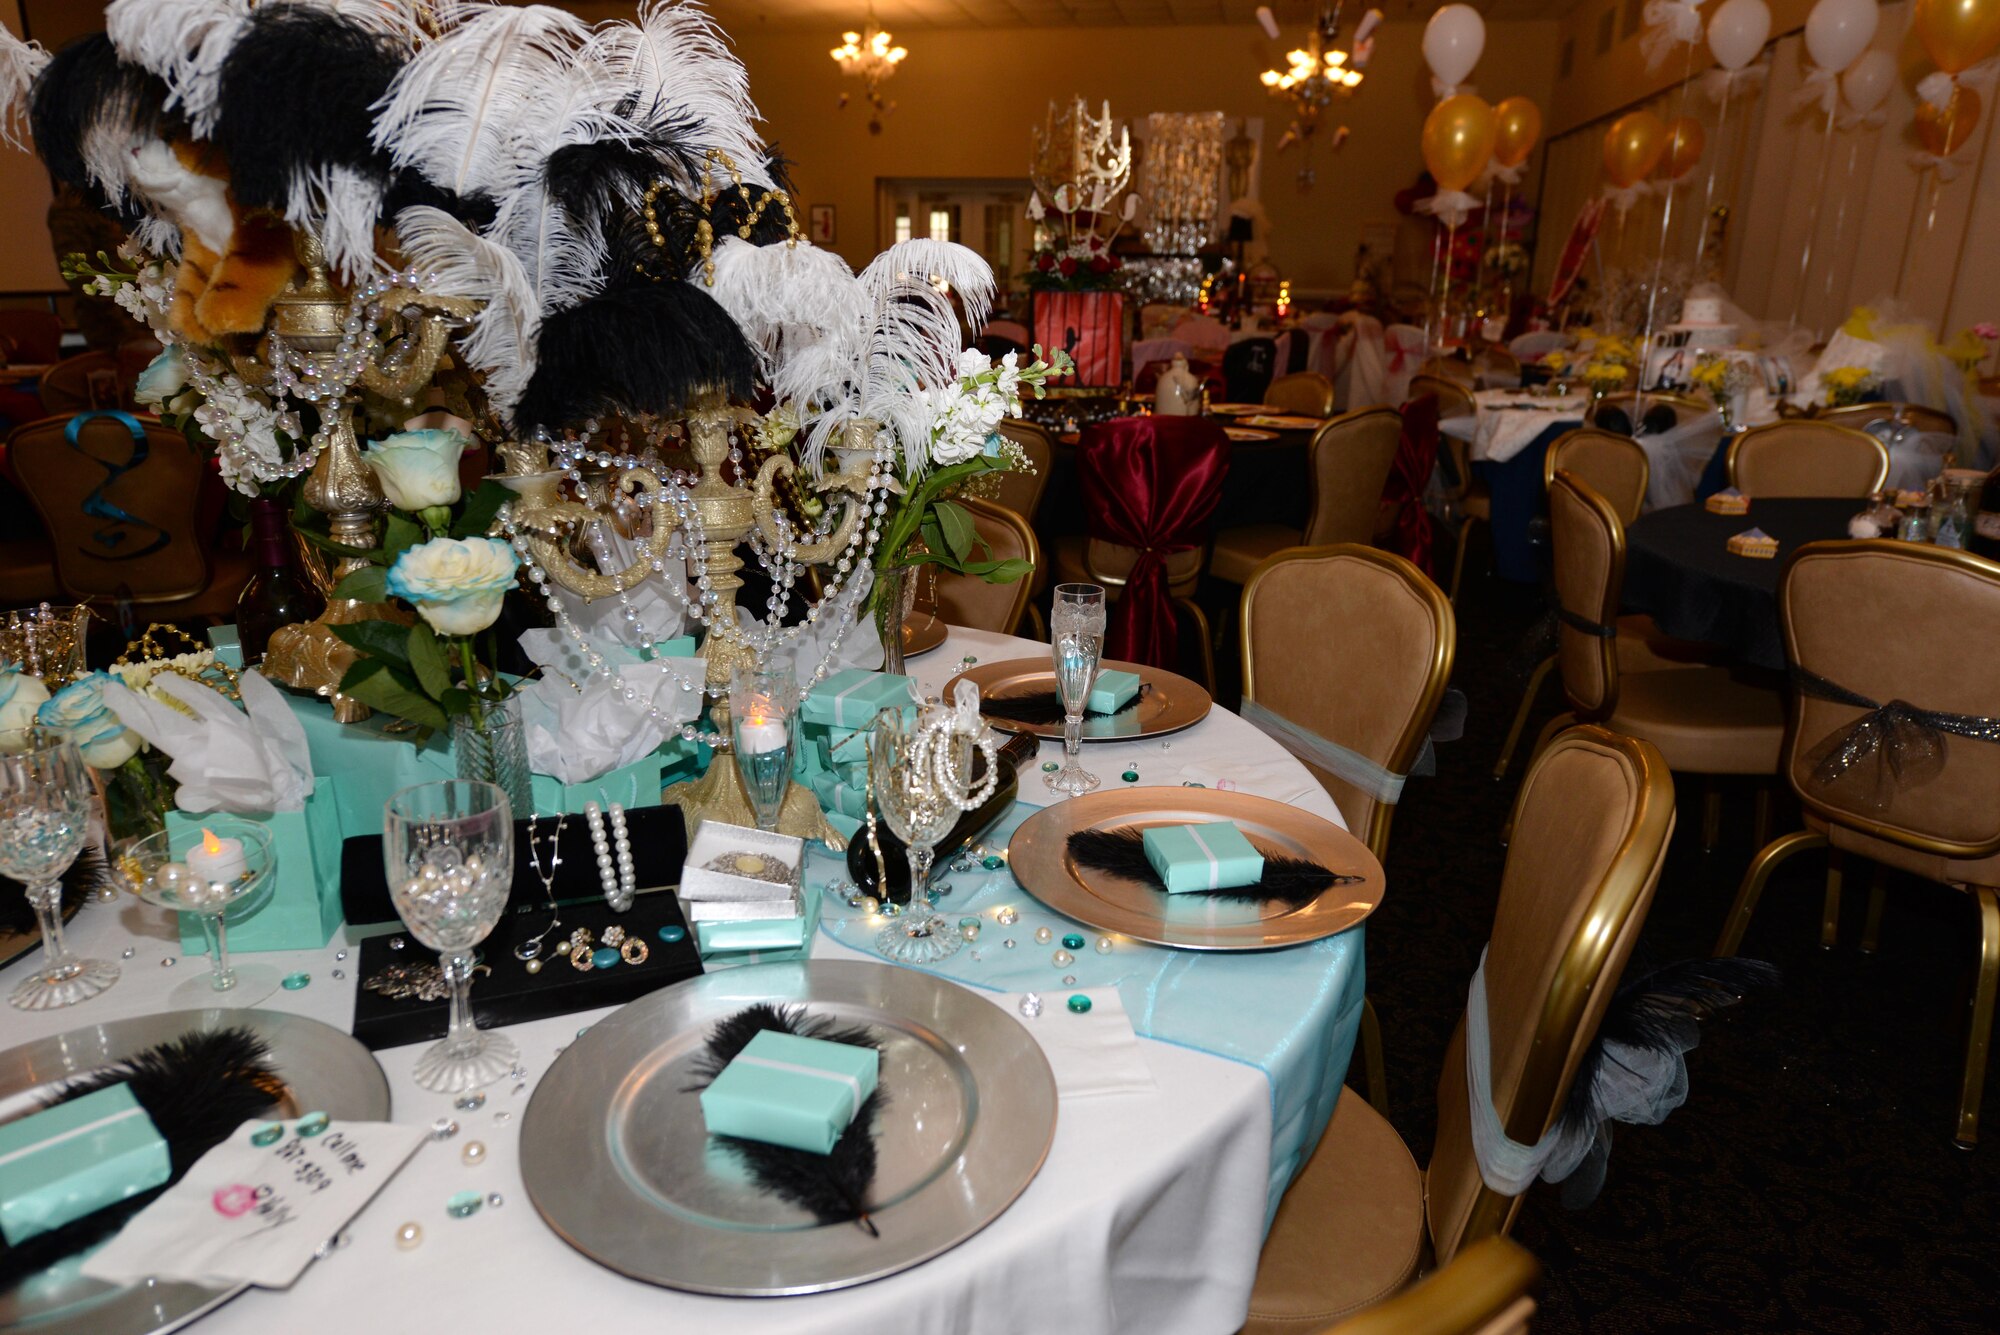 Spouses decorated a total of 14 tables to be judged for the first-ever Spouses Dining-in, March 5, 2016, at Seymour Johnson Air Force Base, North Carolina. Some of the themes were “Breakfast at Tiffany’s,” “The Great Gatsby,” “Alice in Wonderland” and “Snow White.” (U.S. photo/Airman 1st Class Ashley Williamson)